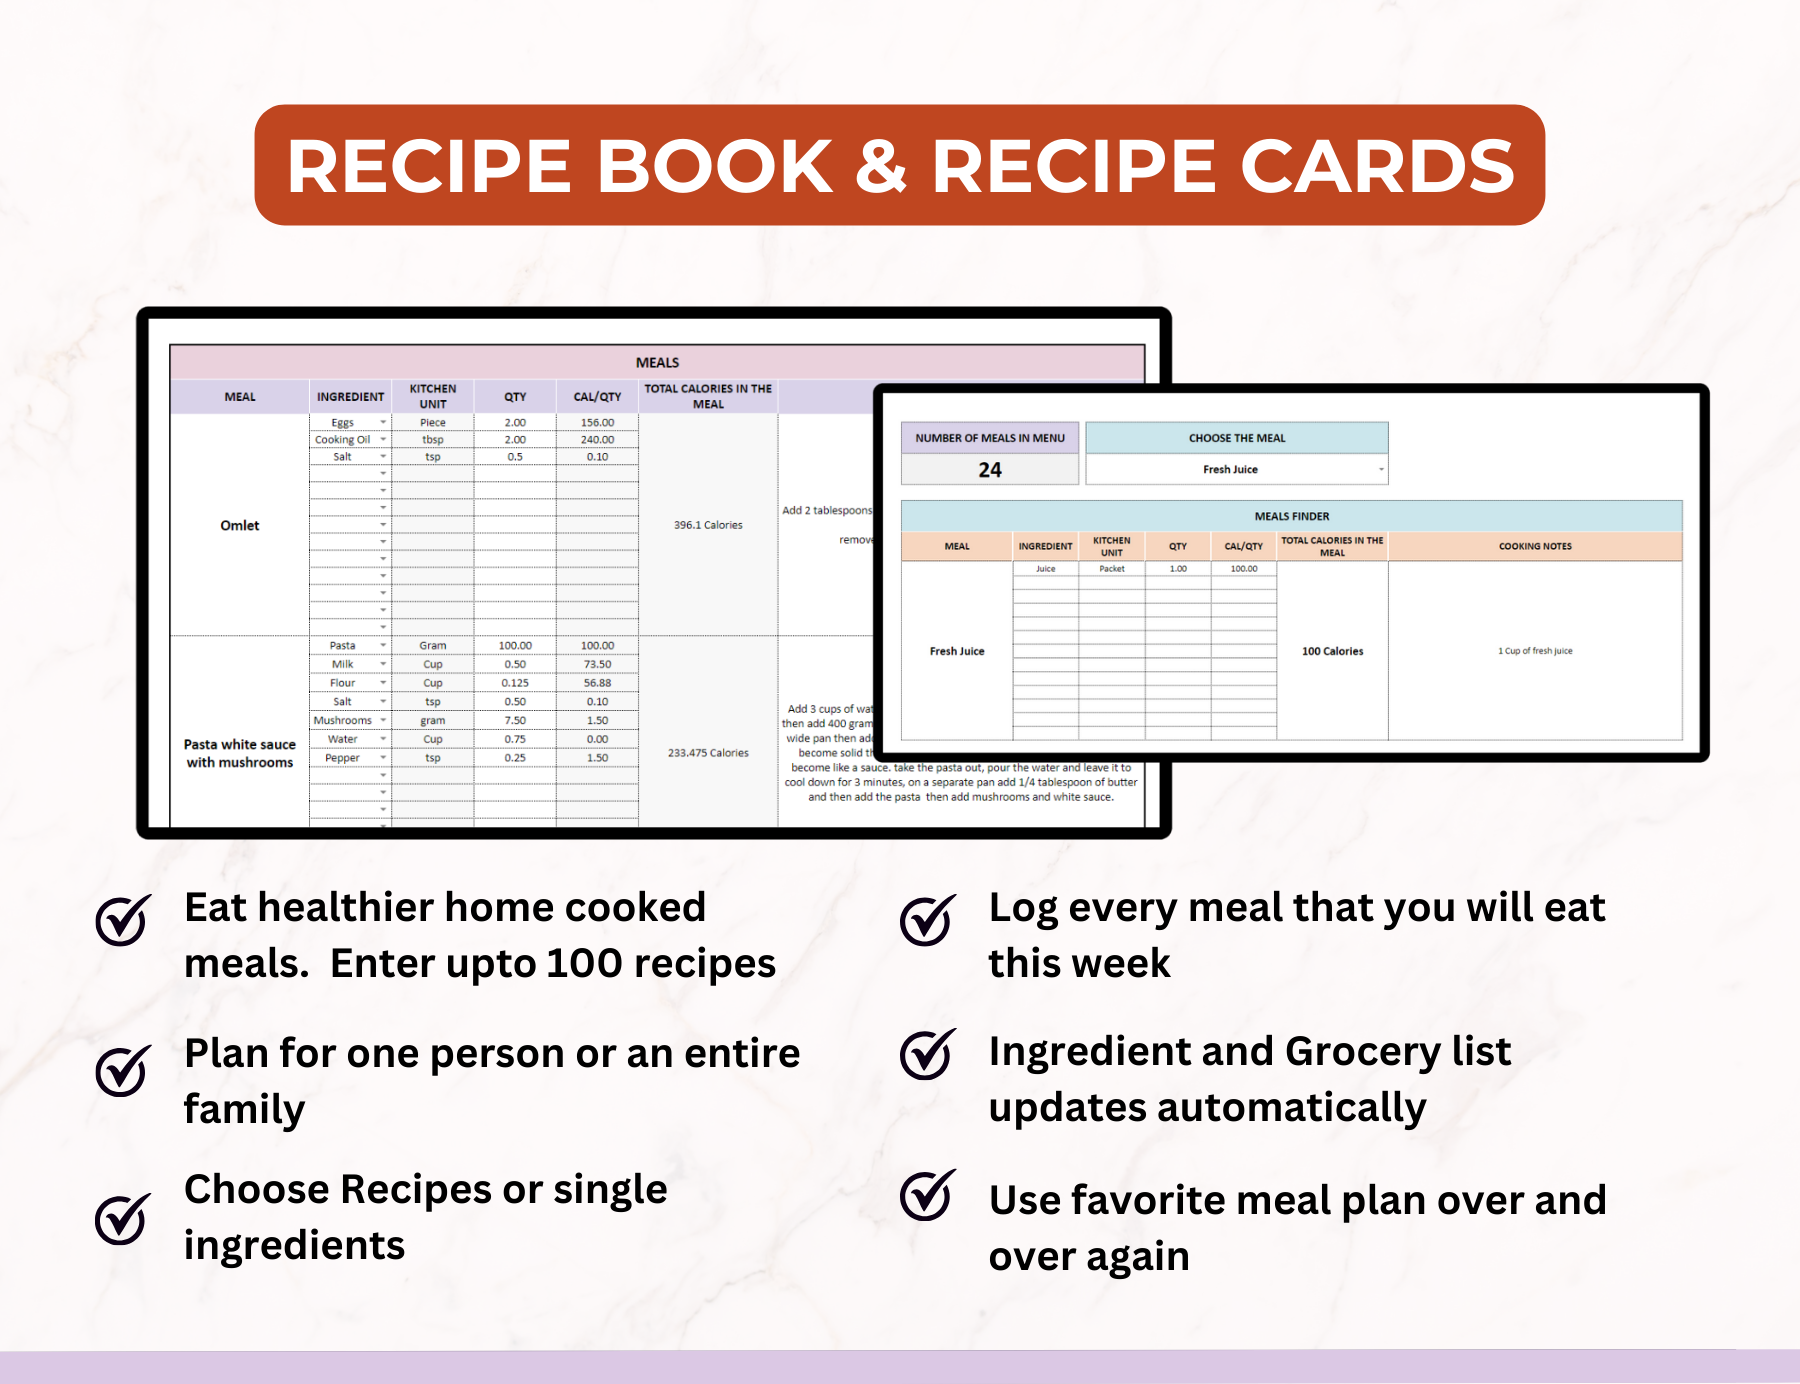 Meal Planner Resell Licensing, PLR Nutrition Products, Grocery List Resale Assets, Customizable Meal Planner PLR